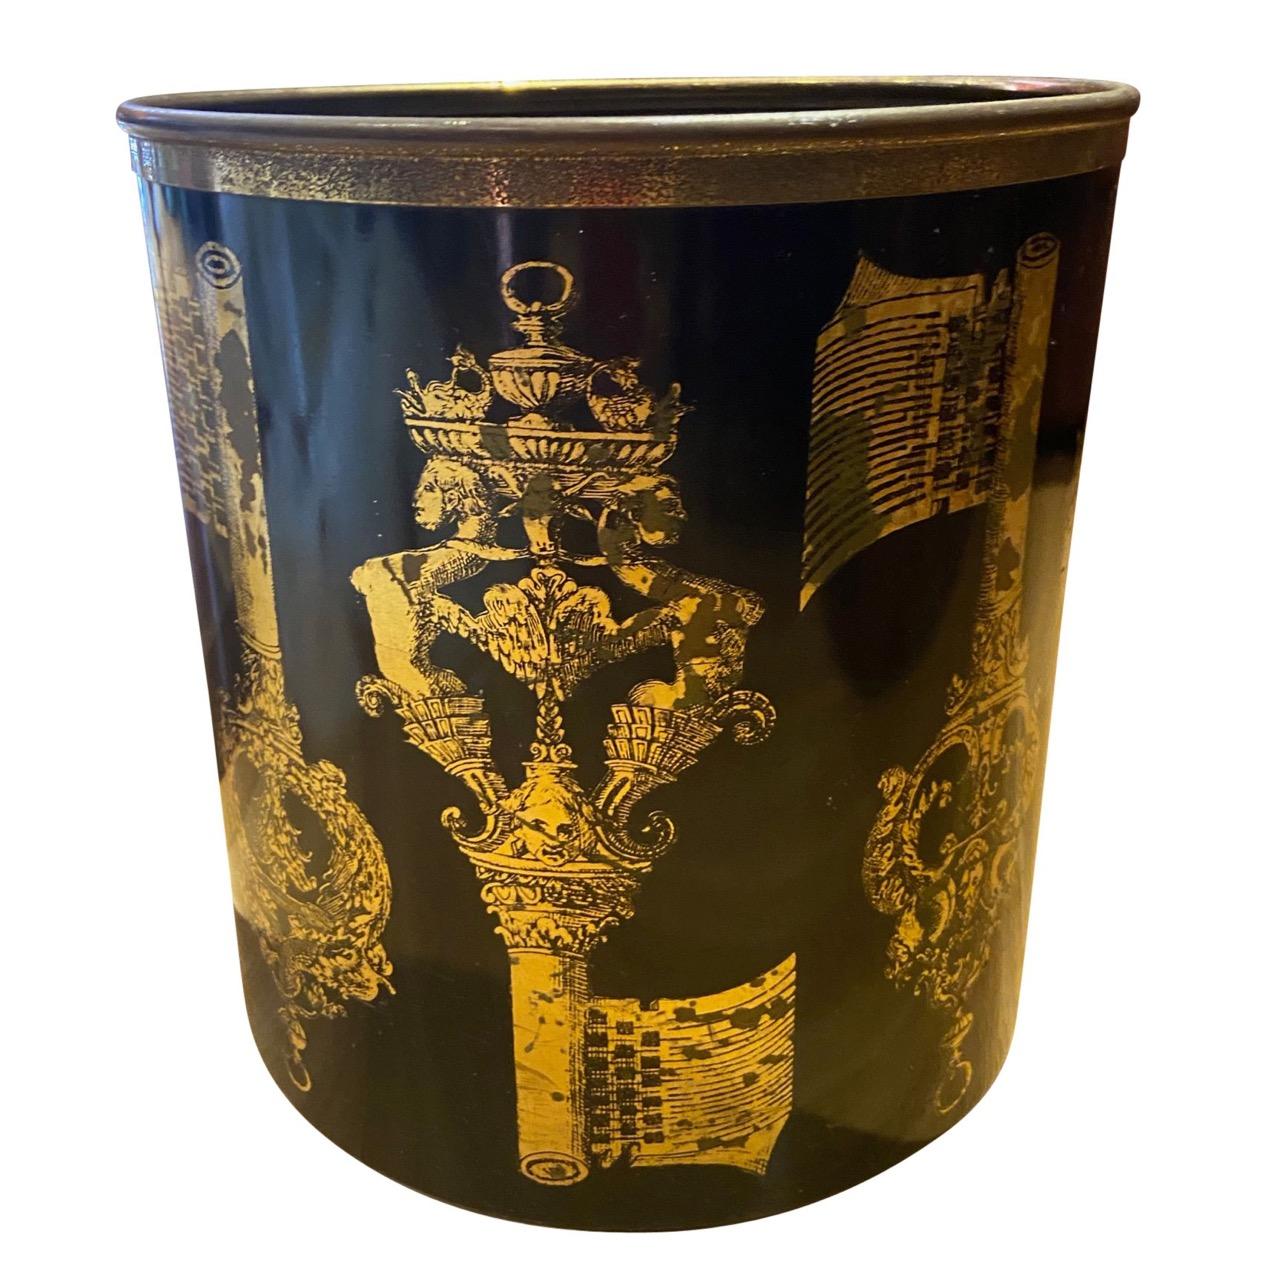 Piero Fornasetti 1950s Black and Gold Stencilled Key Design Paper Waste Basket For Sale 4